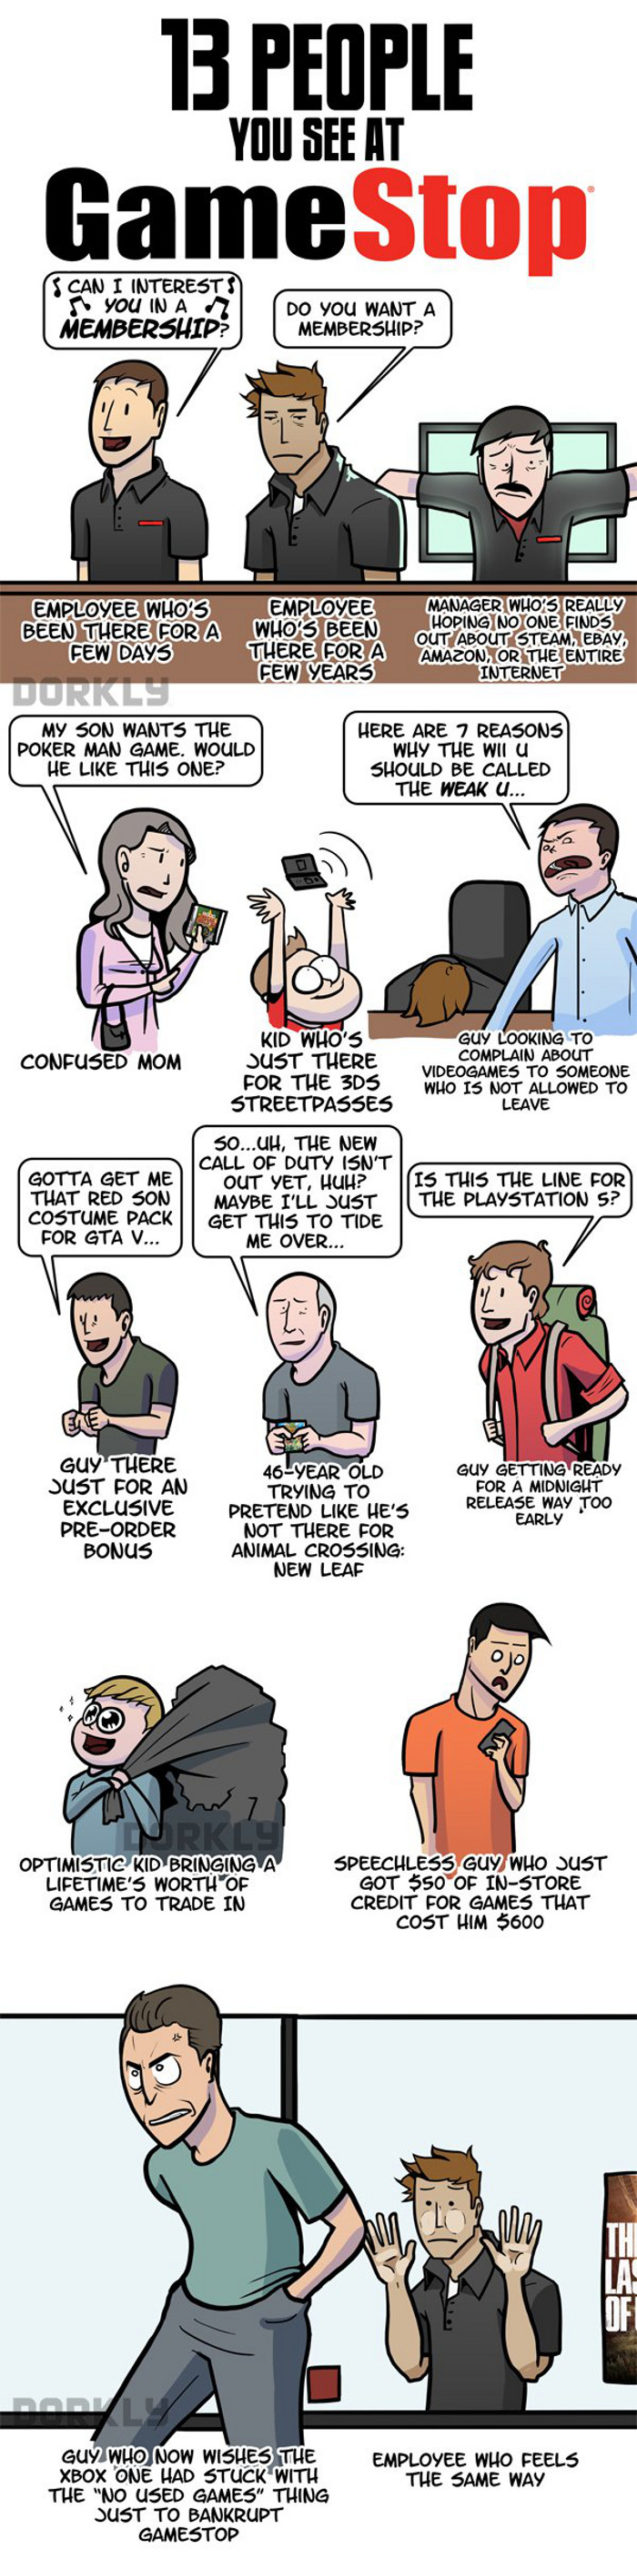 These Are The 13 Types Of People You Meet At Your Local Video Game Store